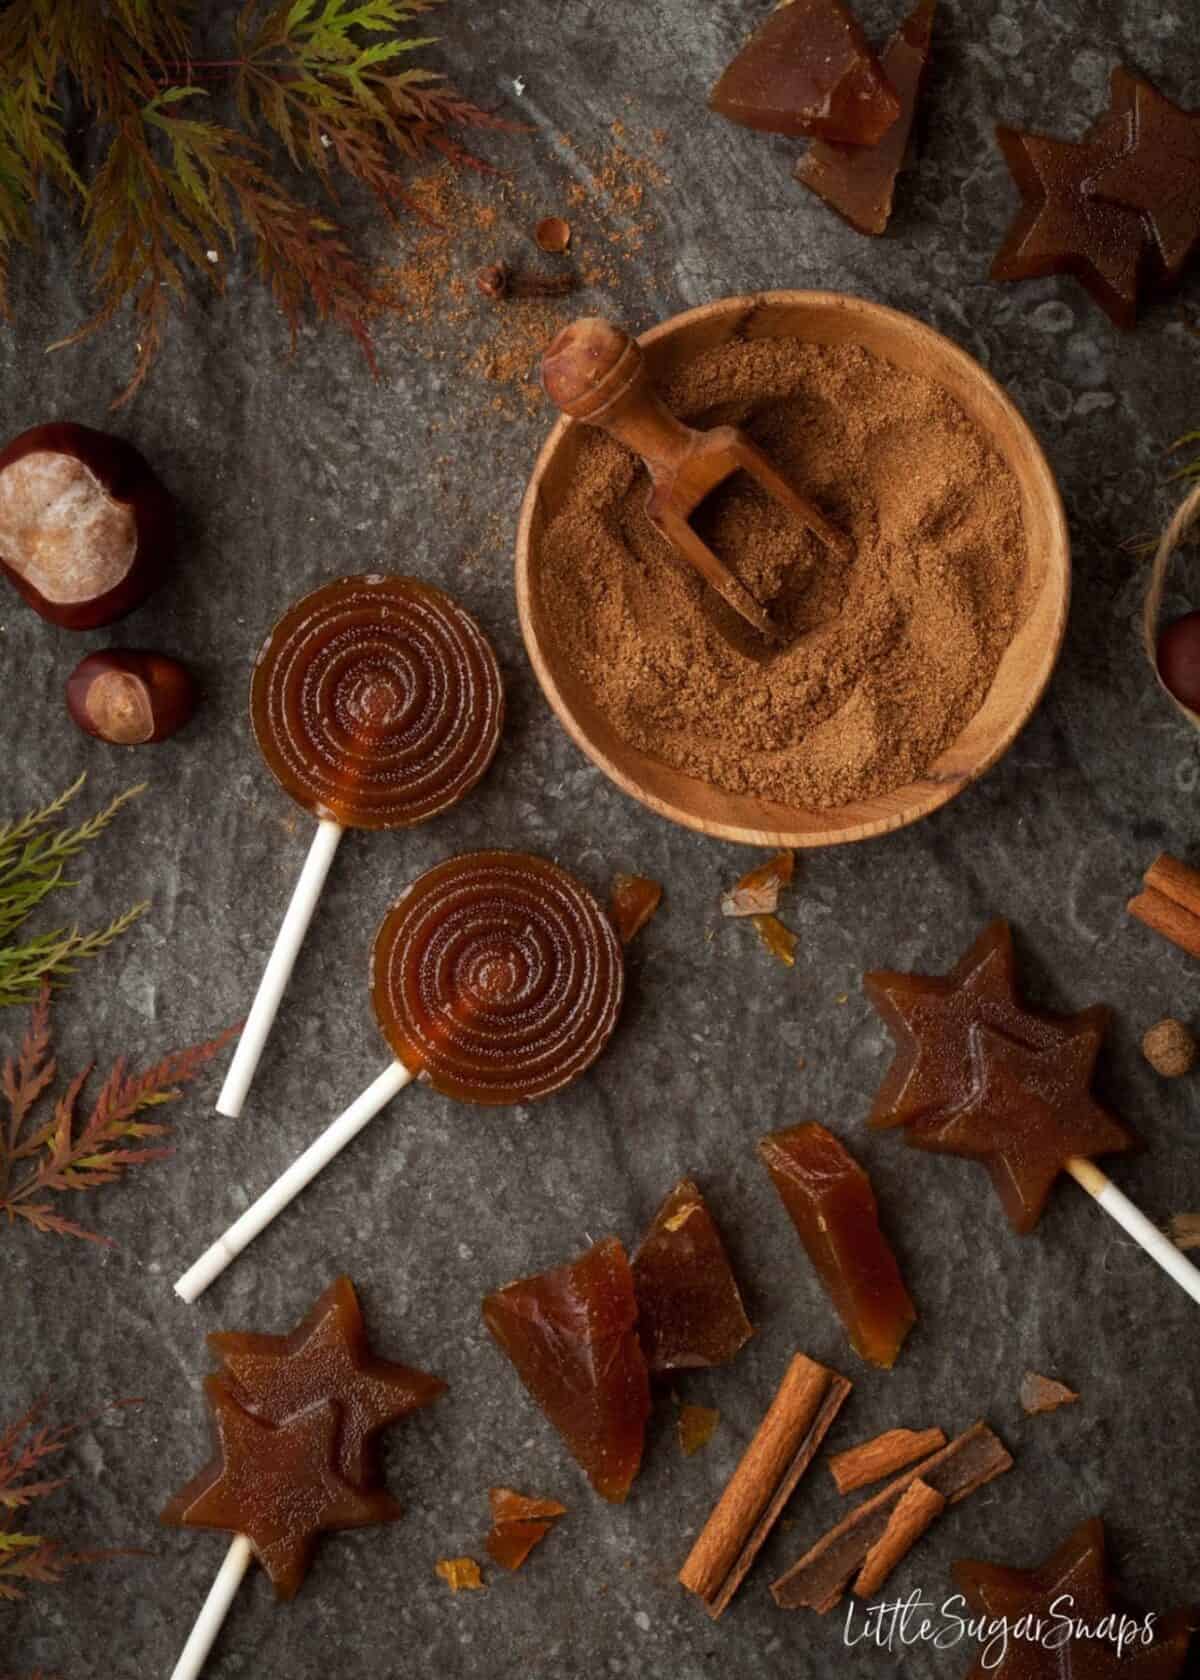 Spiced Toffee pieces and toffee lollipops on a grey worktop.